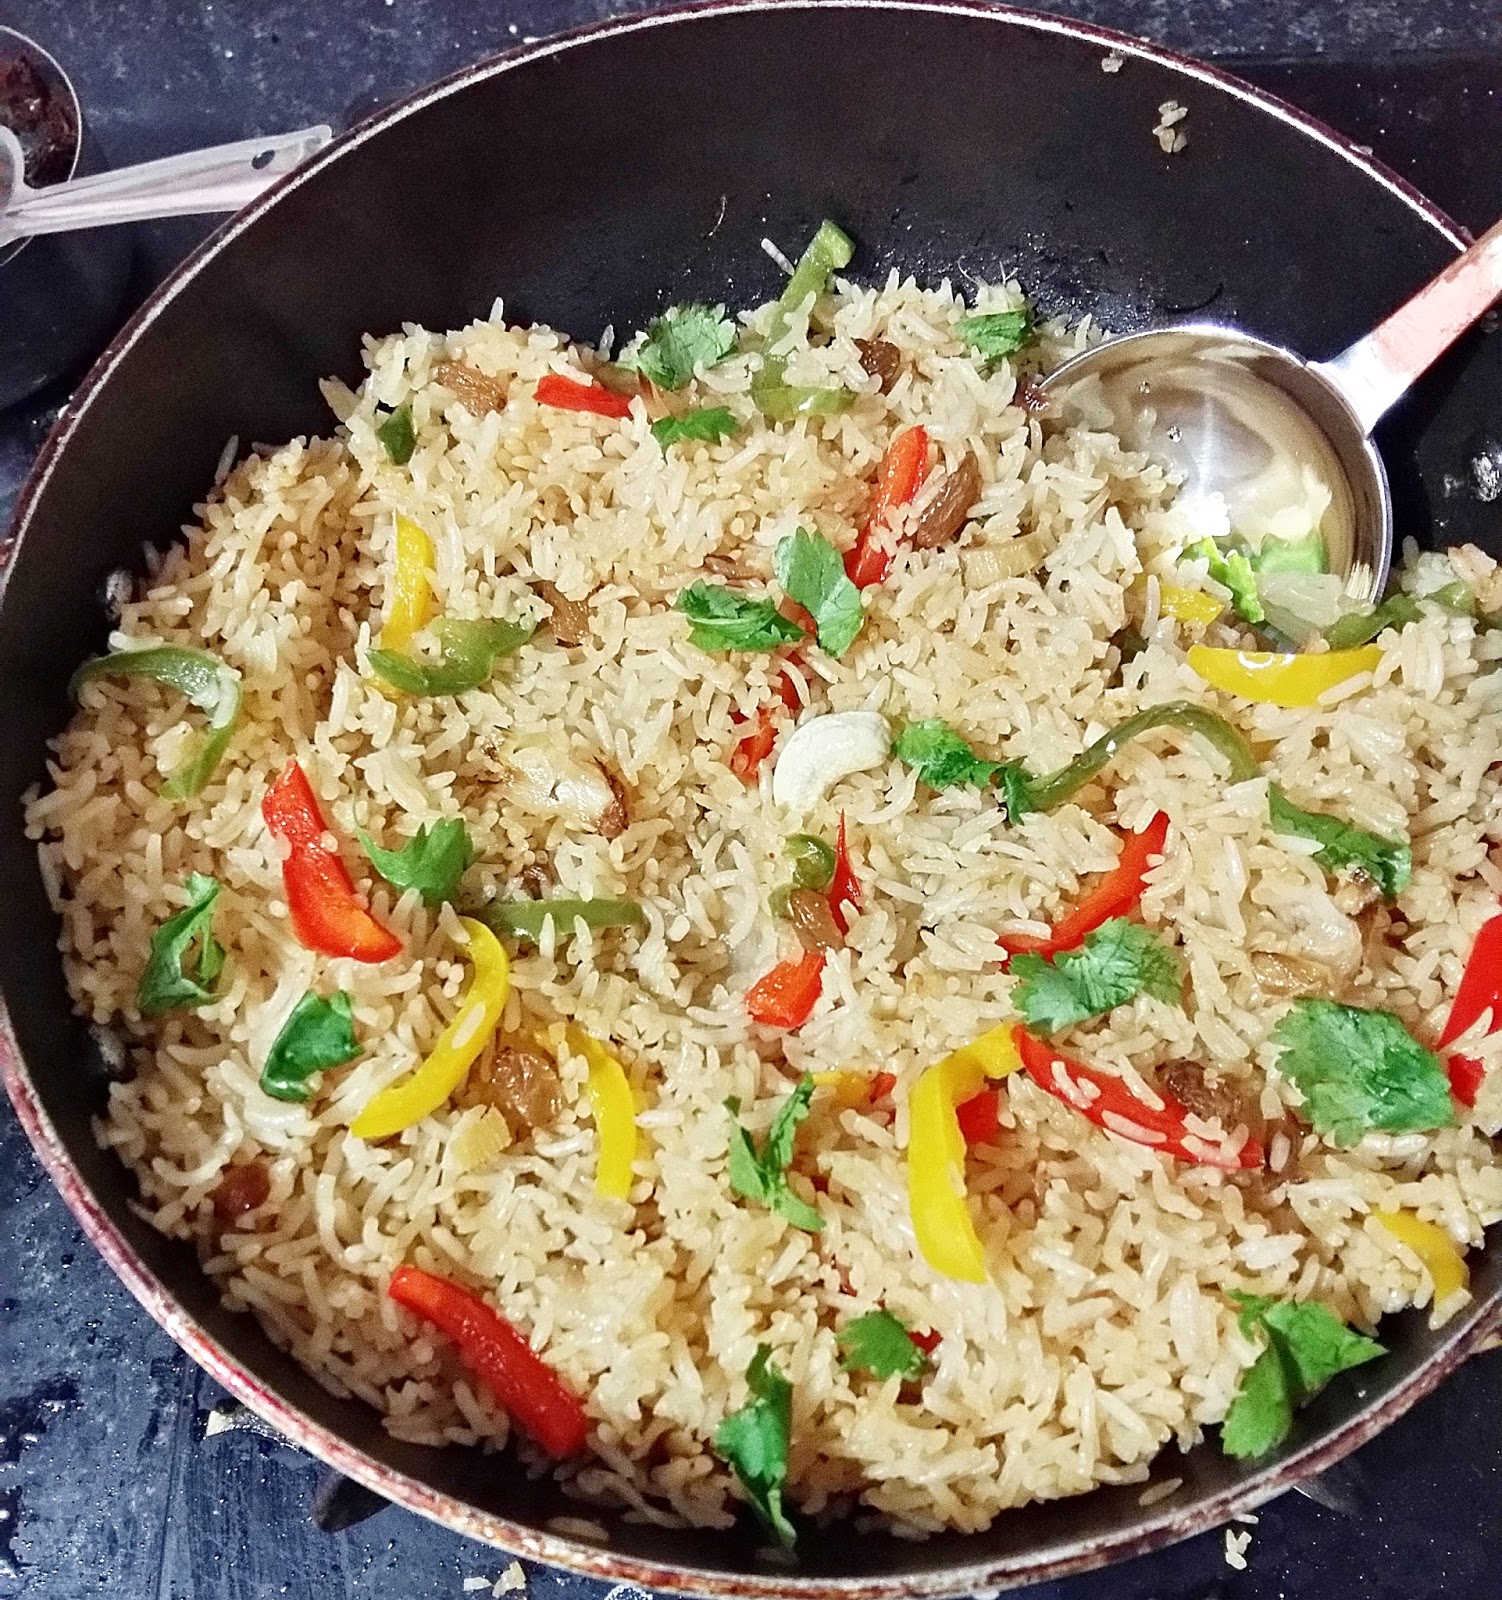 Capsicum Pulao Indian Fried Rice With Bell Pepper Baisalis